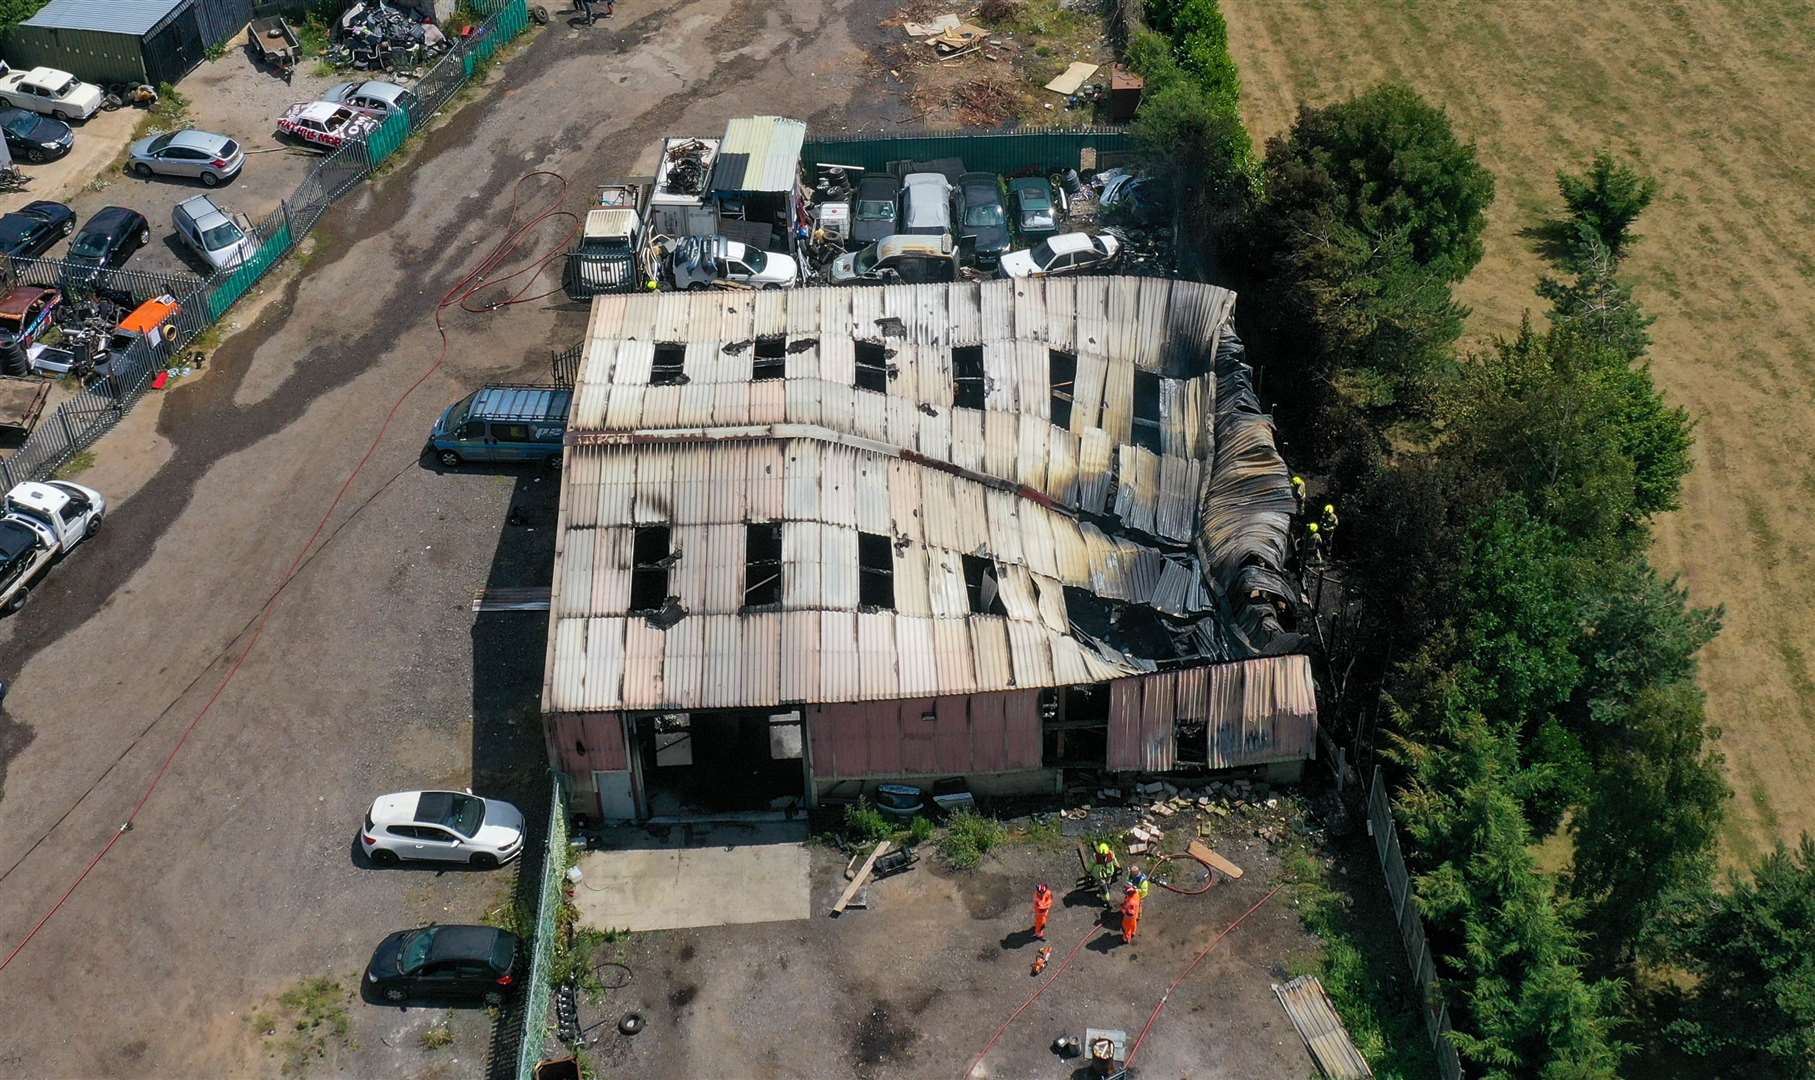 Images of the aftermath reveal half of the industrial building has collapsed. Picture: UKNIP